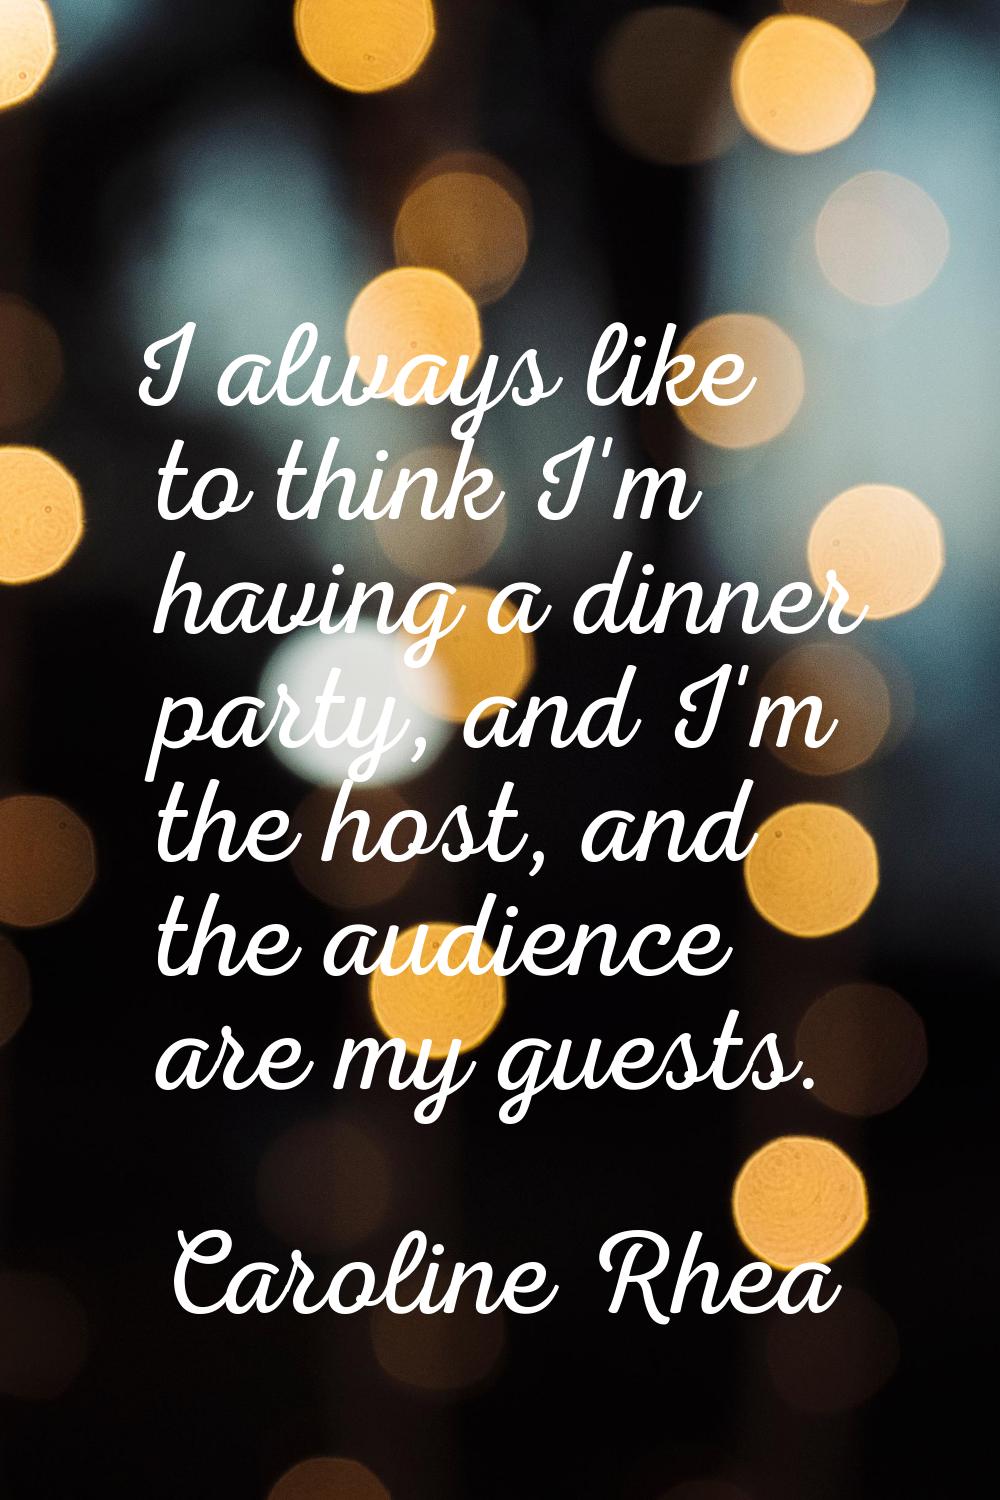 I always like to think I'm having a dinner party, and I'm the host, and the audience are my guests.